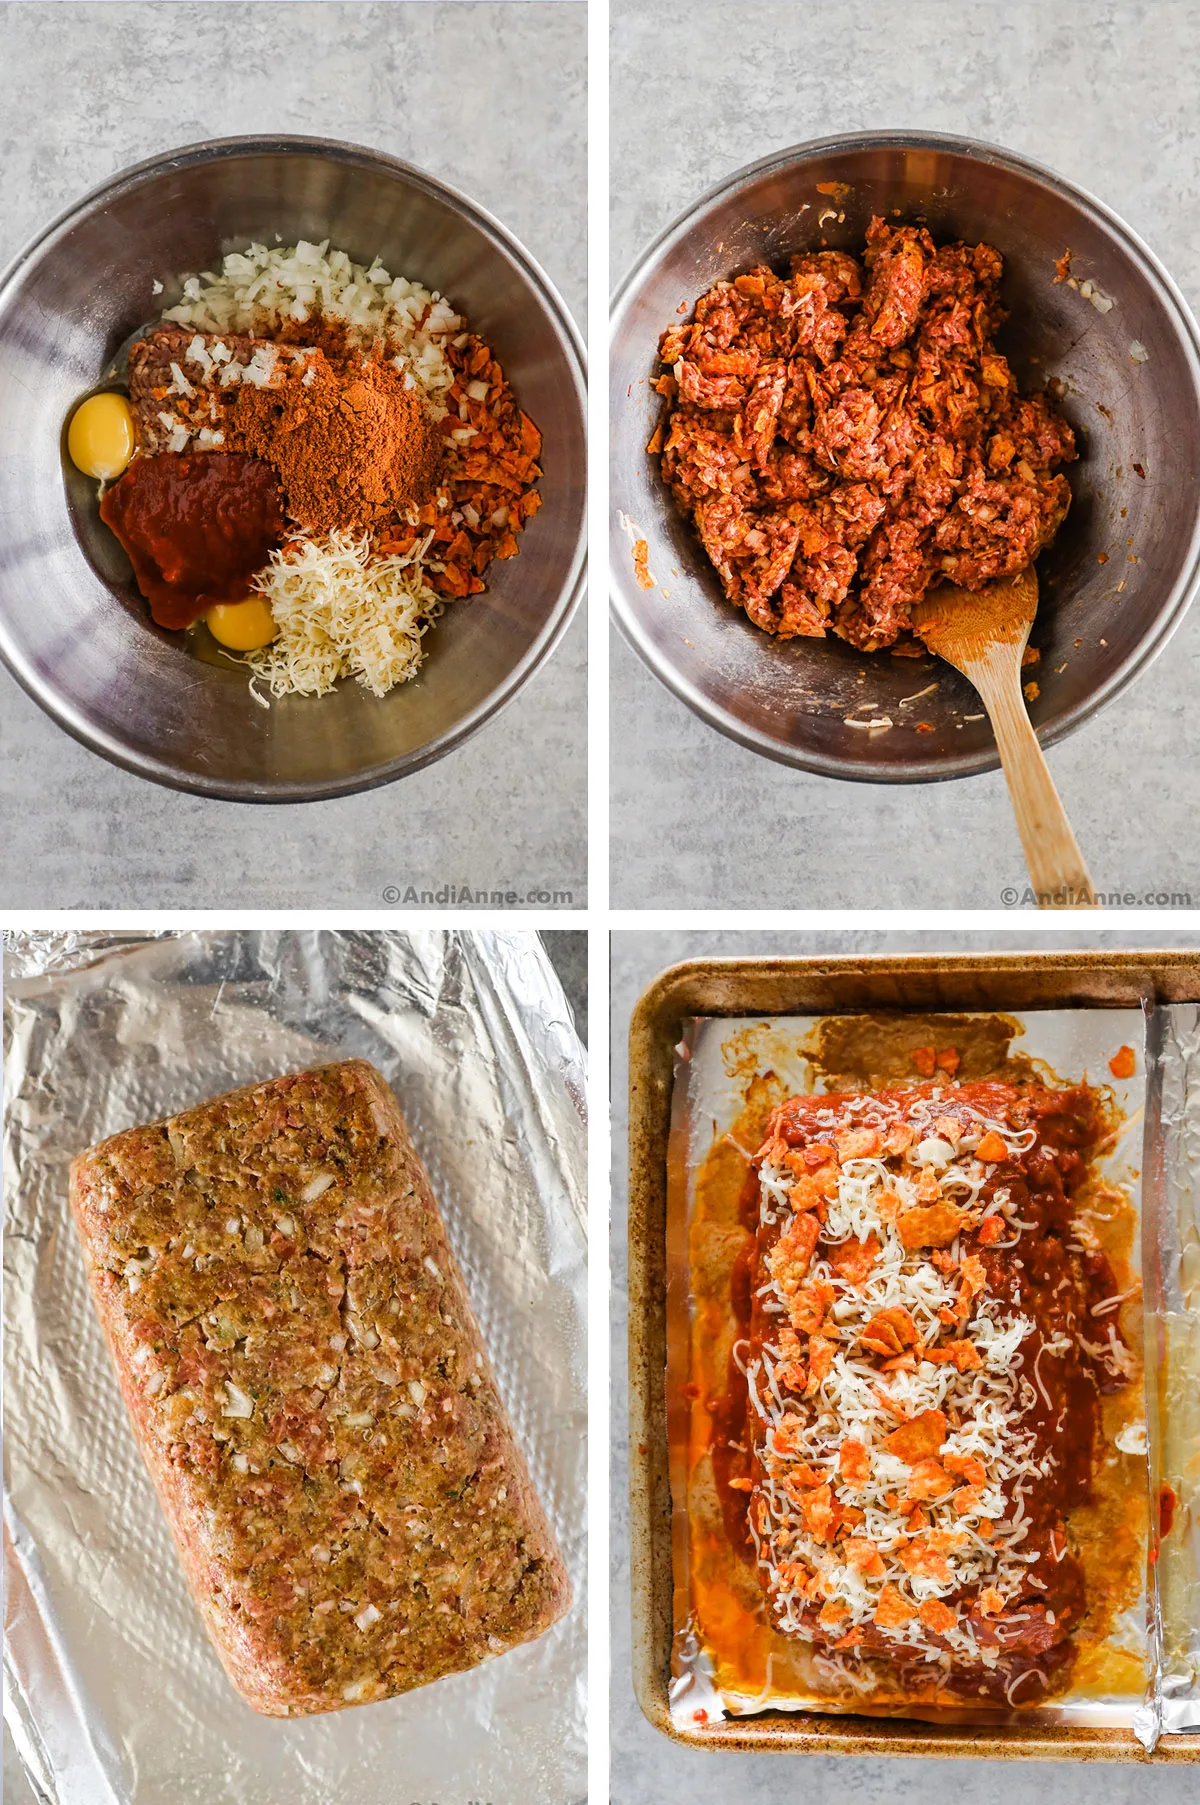 Four images with steps to make recipe. First is ingredients dumped in, second is ground beef mixture in bowl with wood spoon, third is raw meatloaf on baking sheet. Fourth is baked meatloaf on baking sheet with sauce, shredded cheese and crushed Doritos.